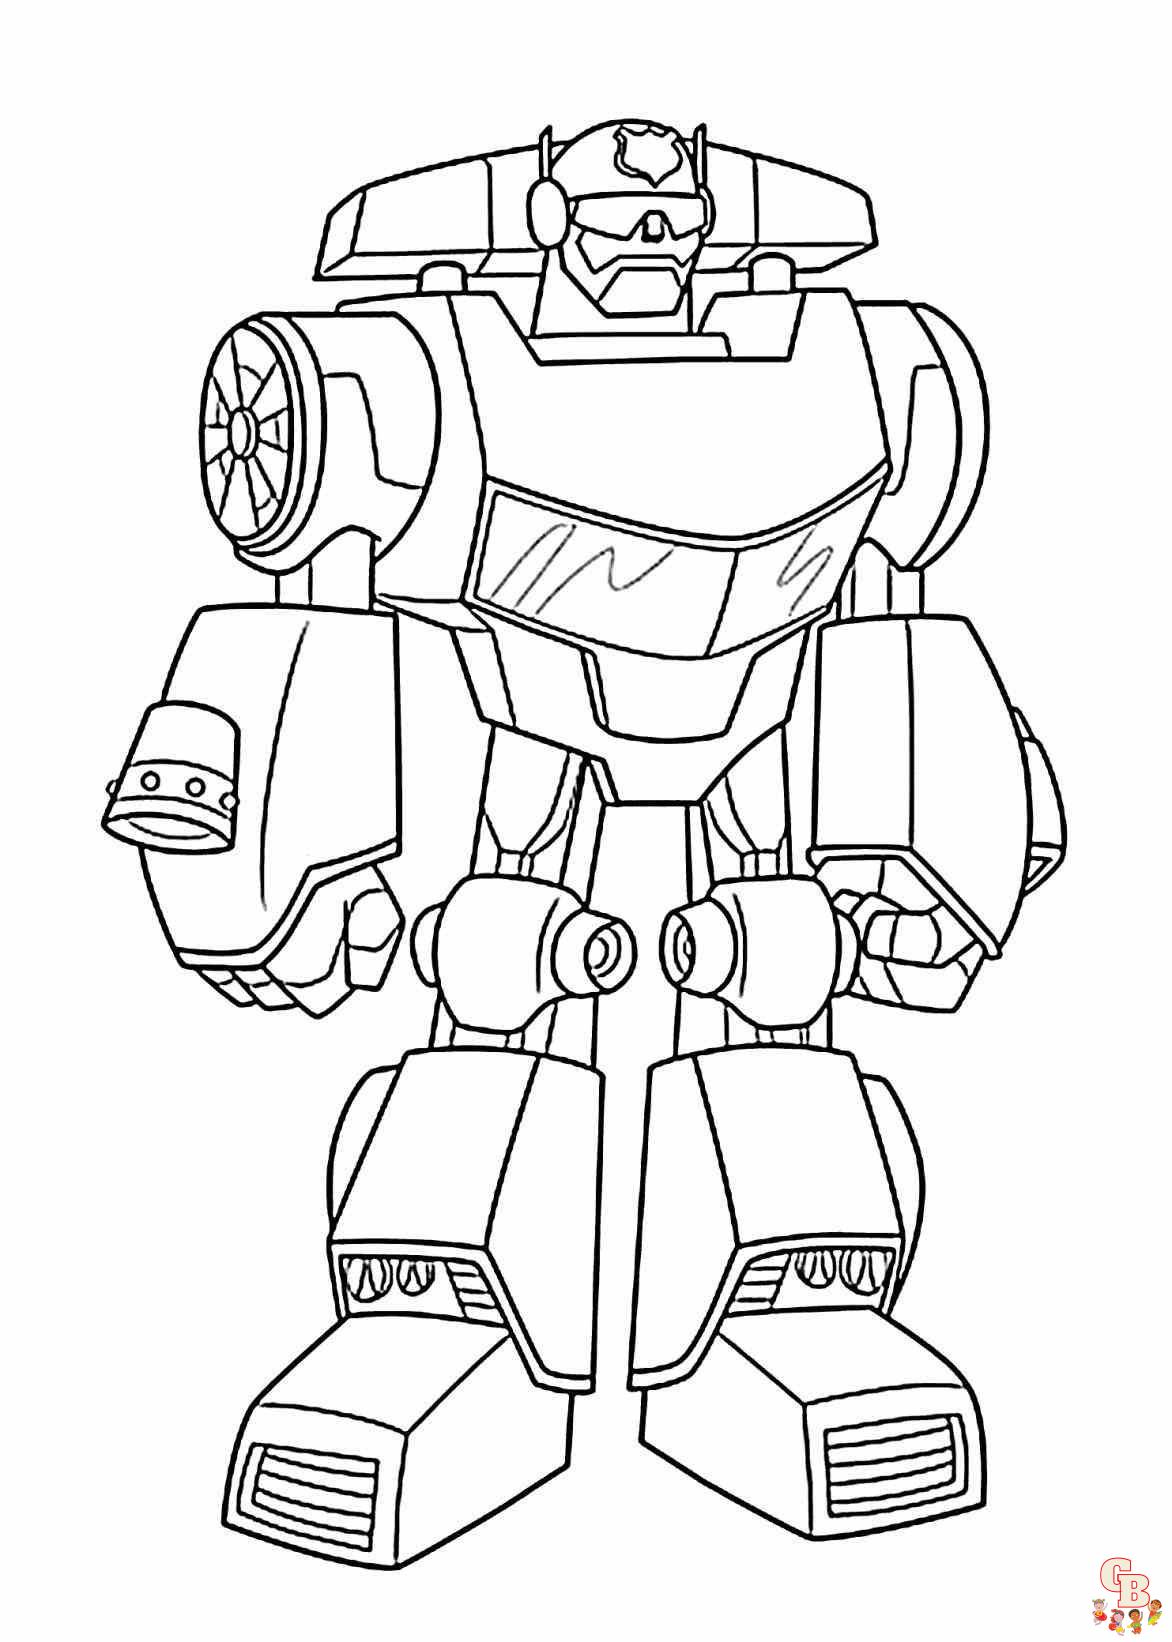 Get Creative with Bumblebee Transformer Coloring Pages | GBcoloring